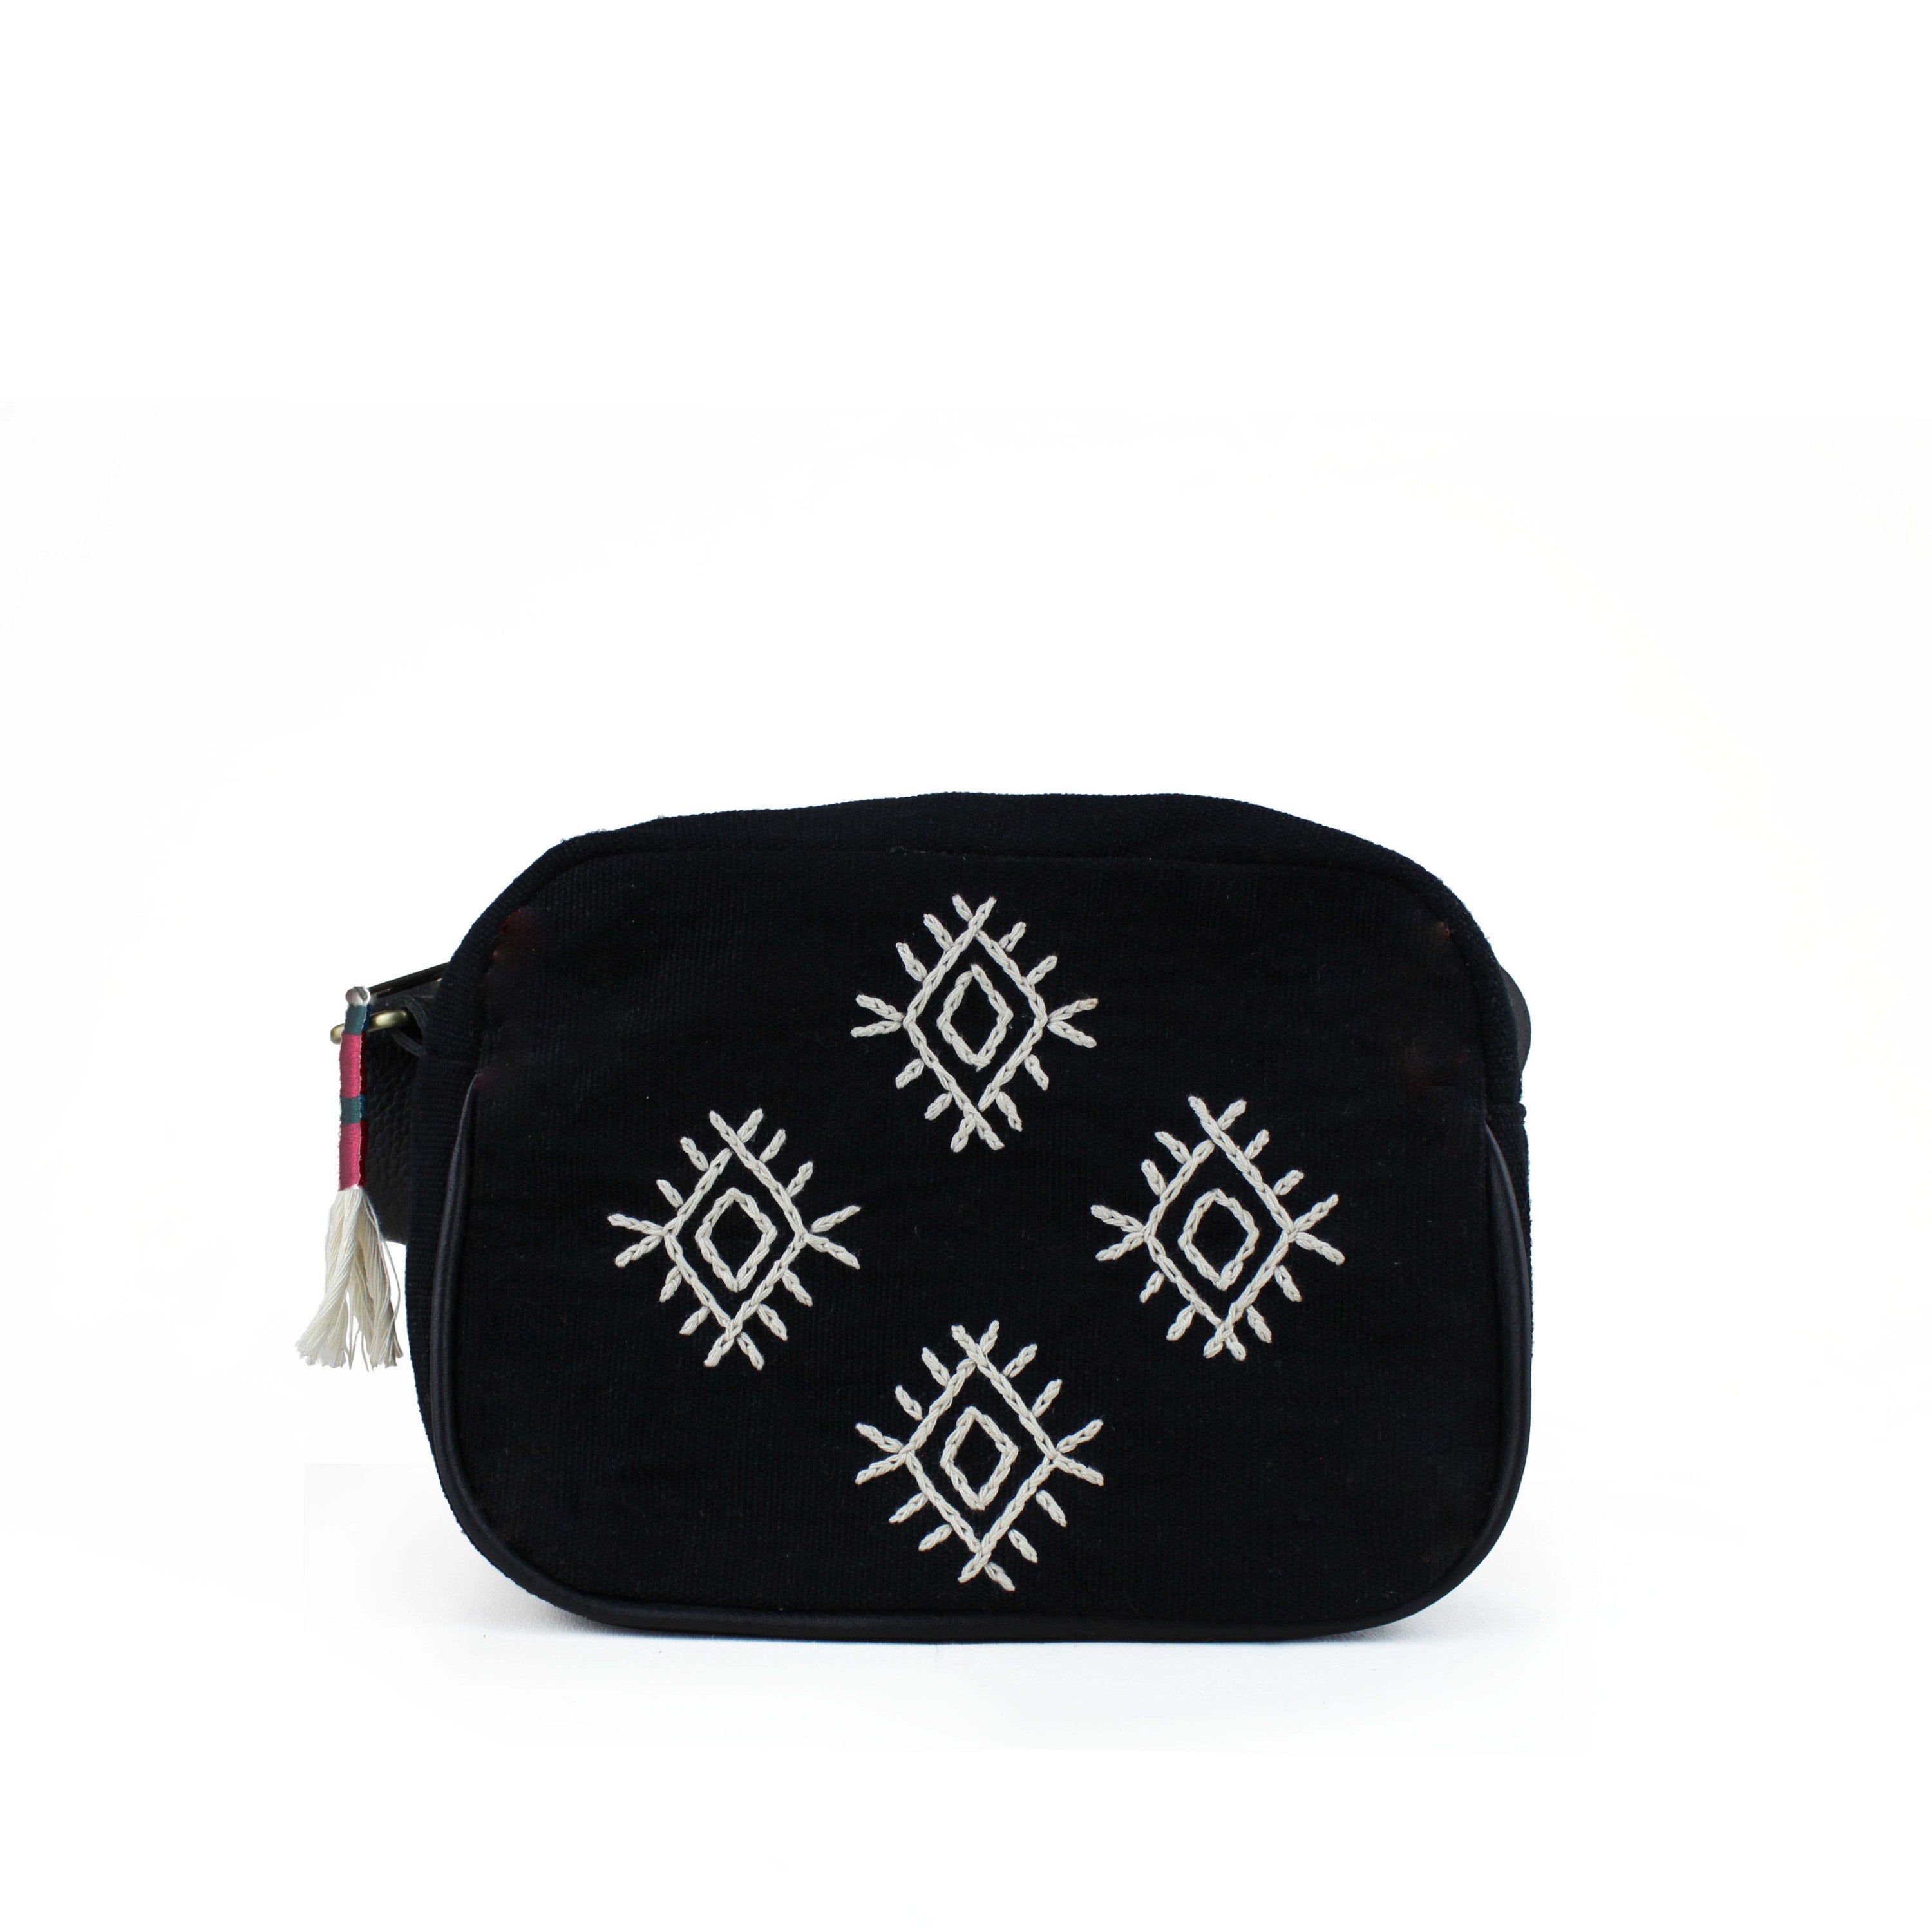 Artisan Juana Handwoven Diamond Embroidery Crossbody. The bag has a black background and four embroidered white diamonds. It has a woven red and green tassel attached to the zipper.